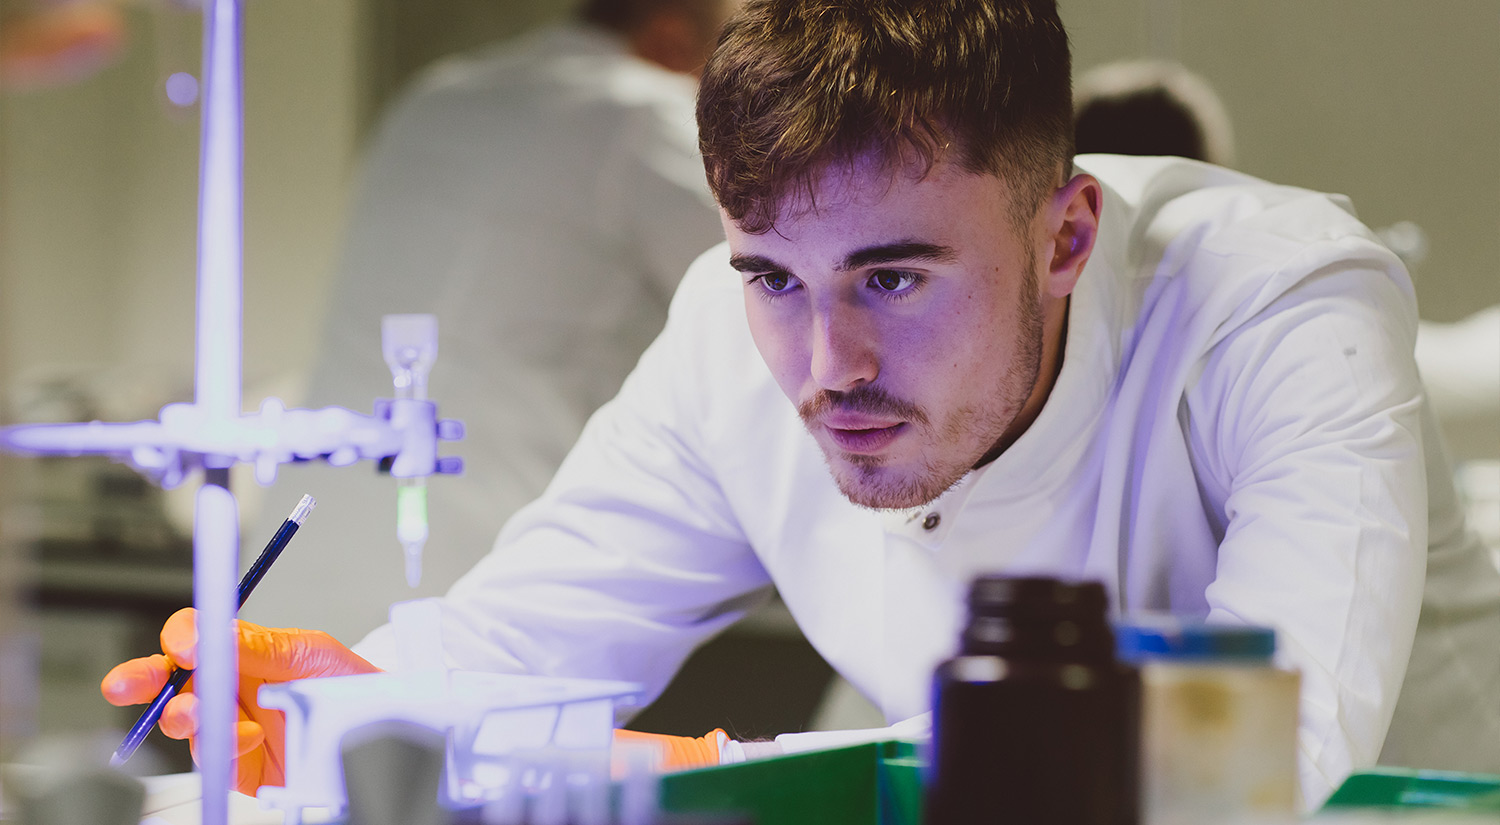 Student in a lab coat performing an experiment